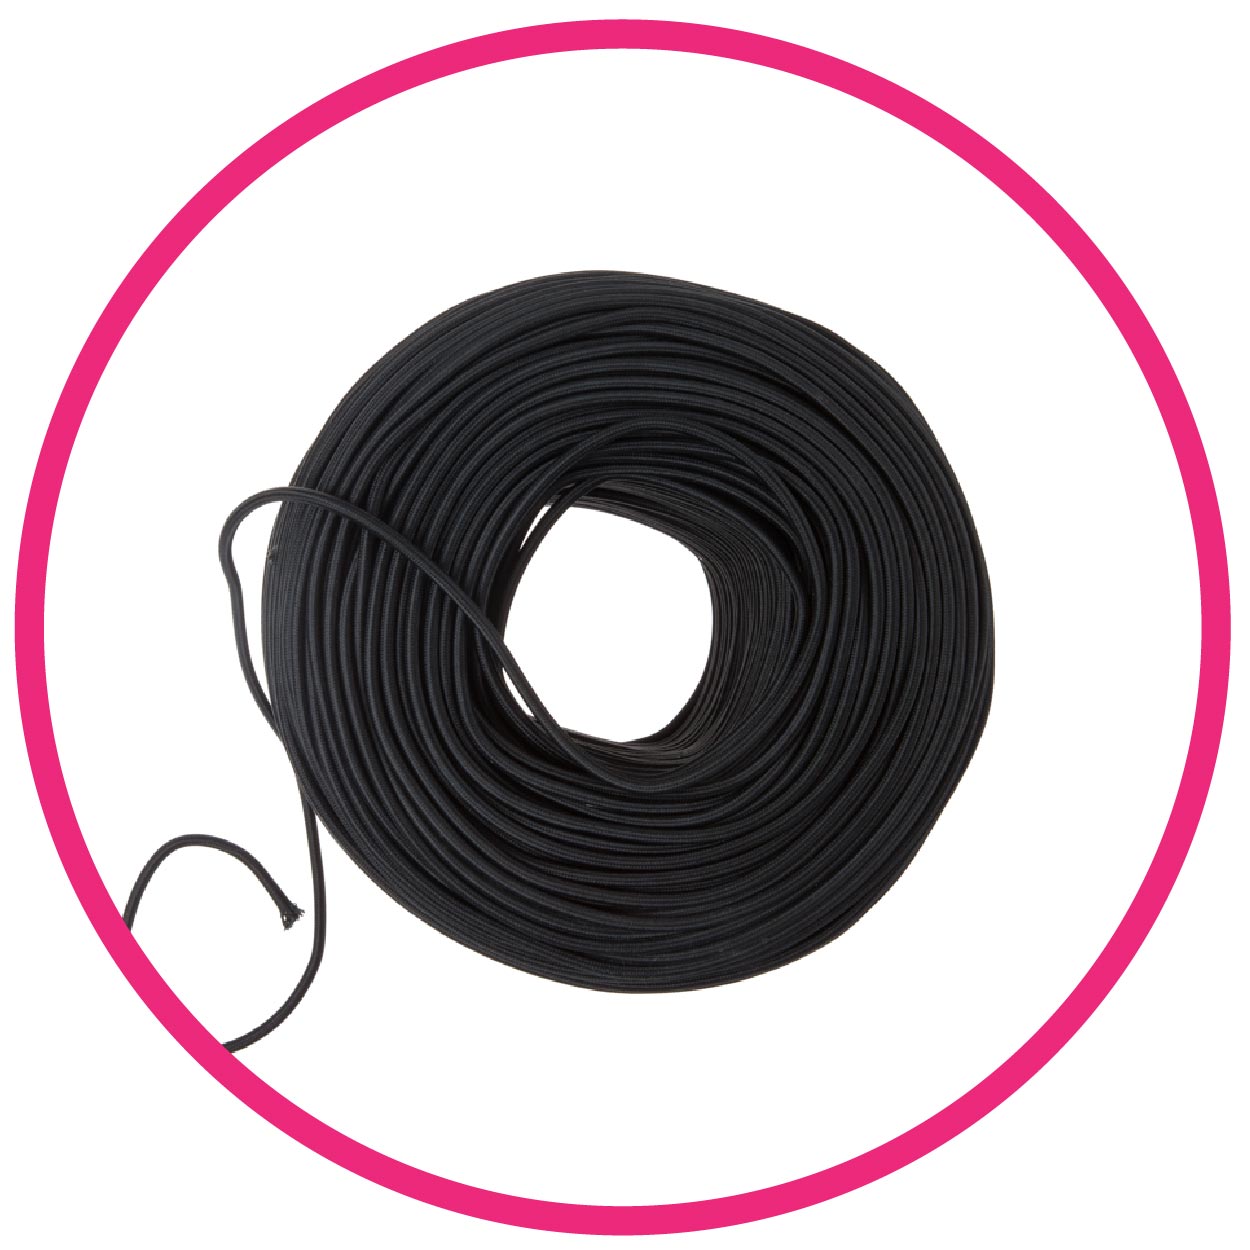 Color Cord’s DIY fabric wire by the foot in black